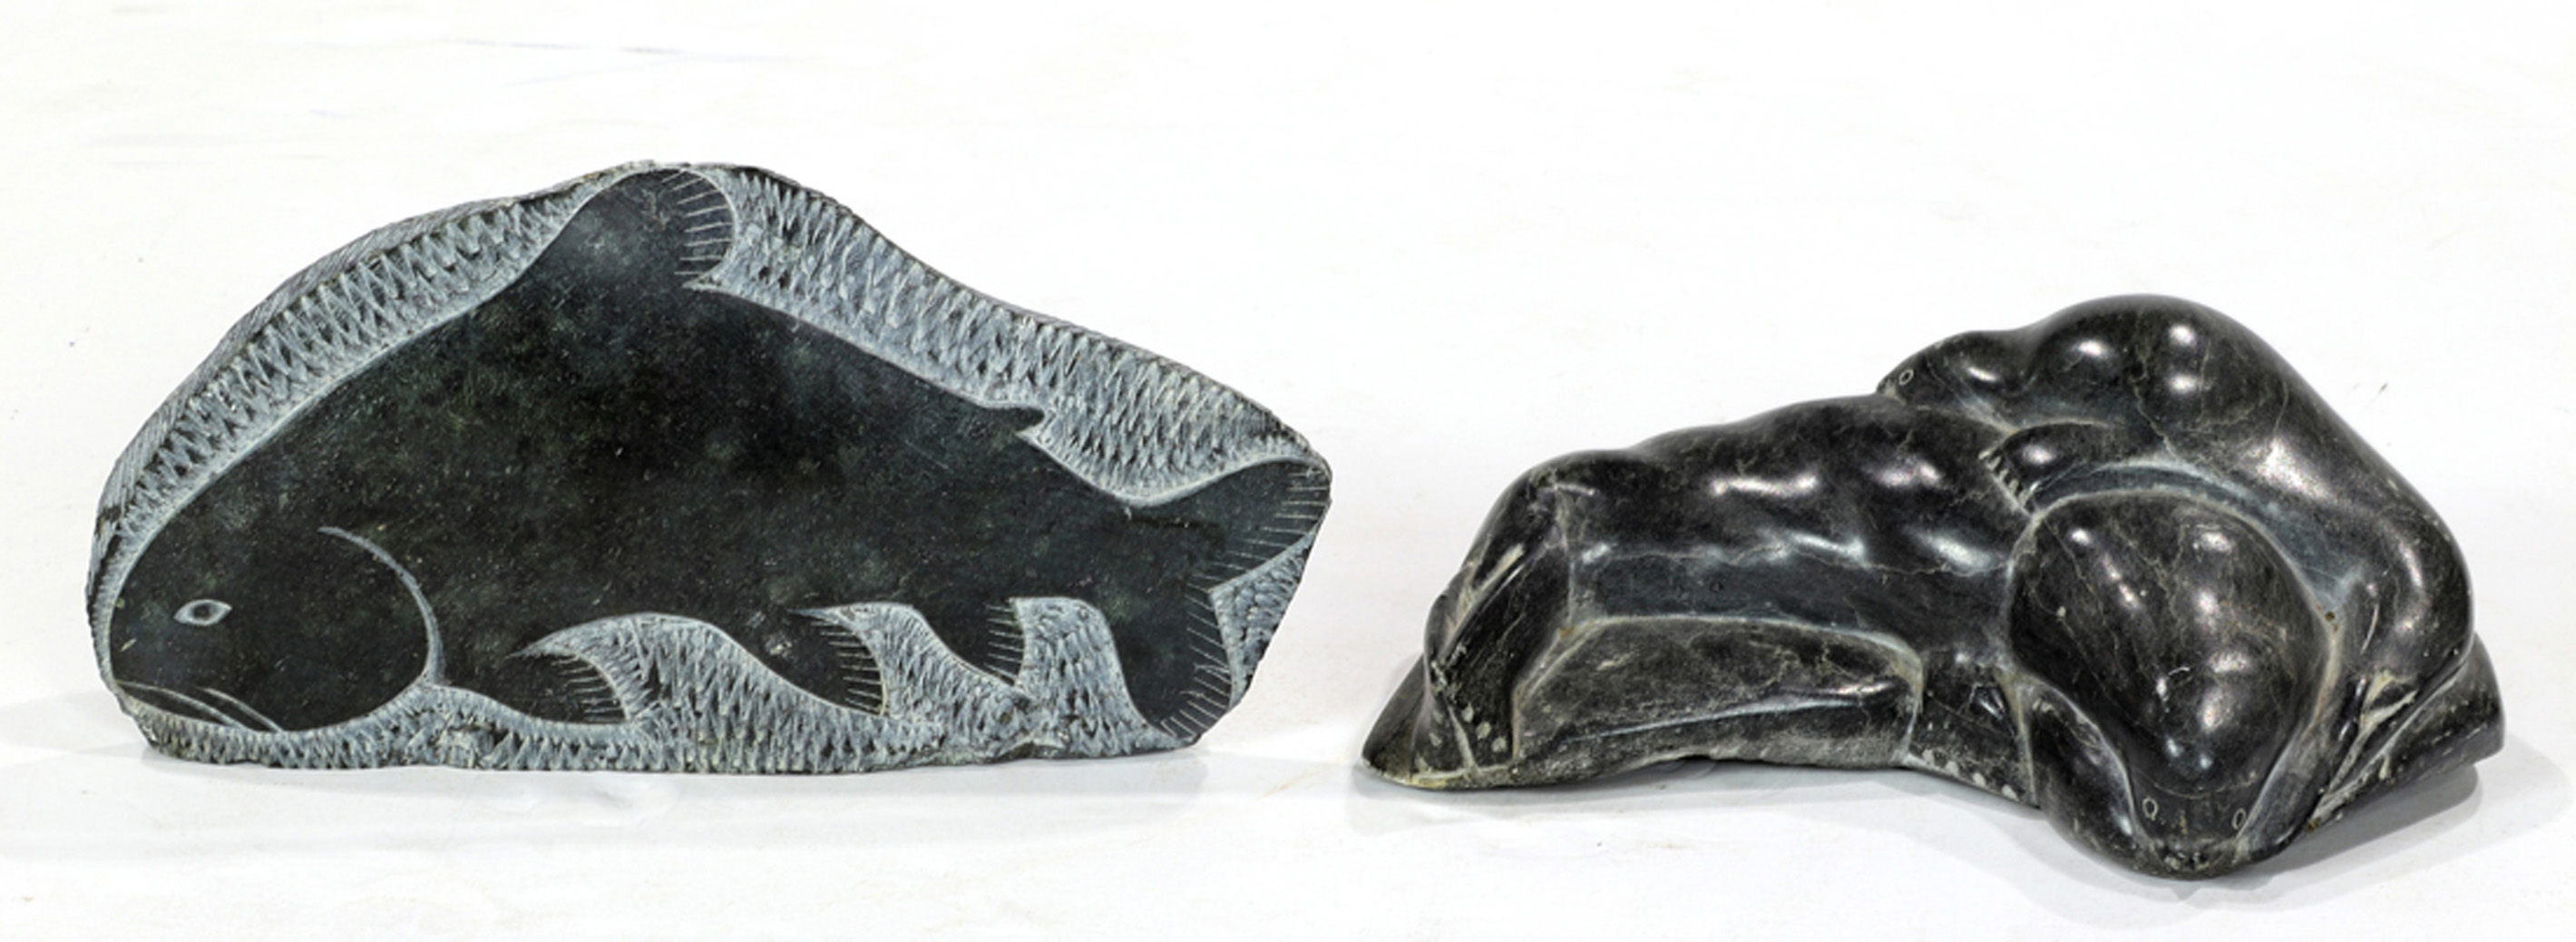 TWO INUIT STONE CARVINGS OF ANIMALS 3a372d